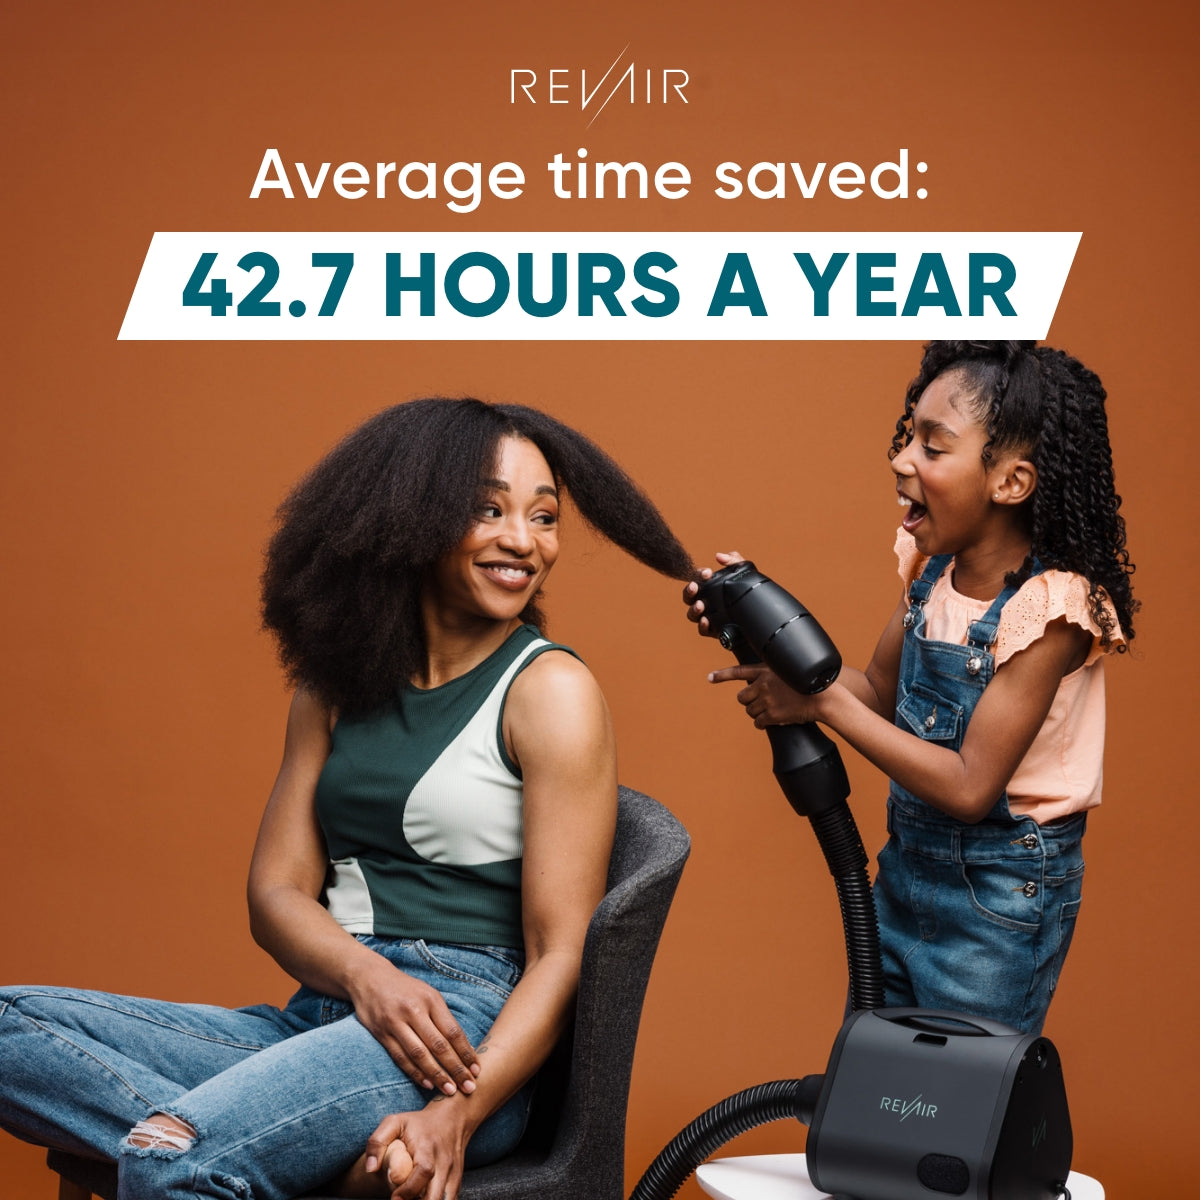 RevAir Average Time Saved: 42.7 hours a year